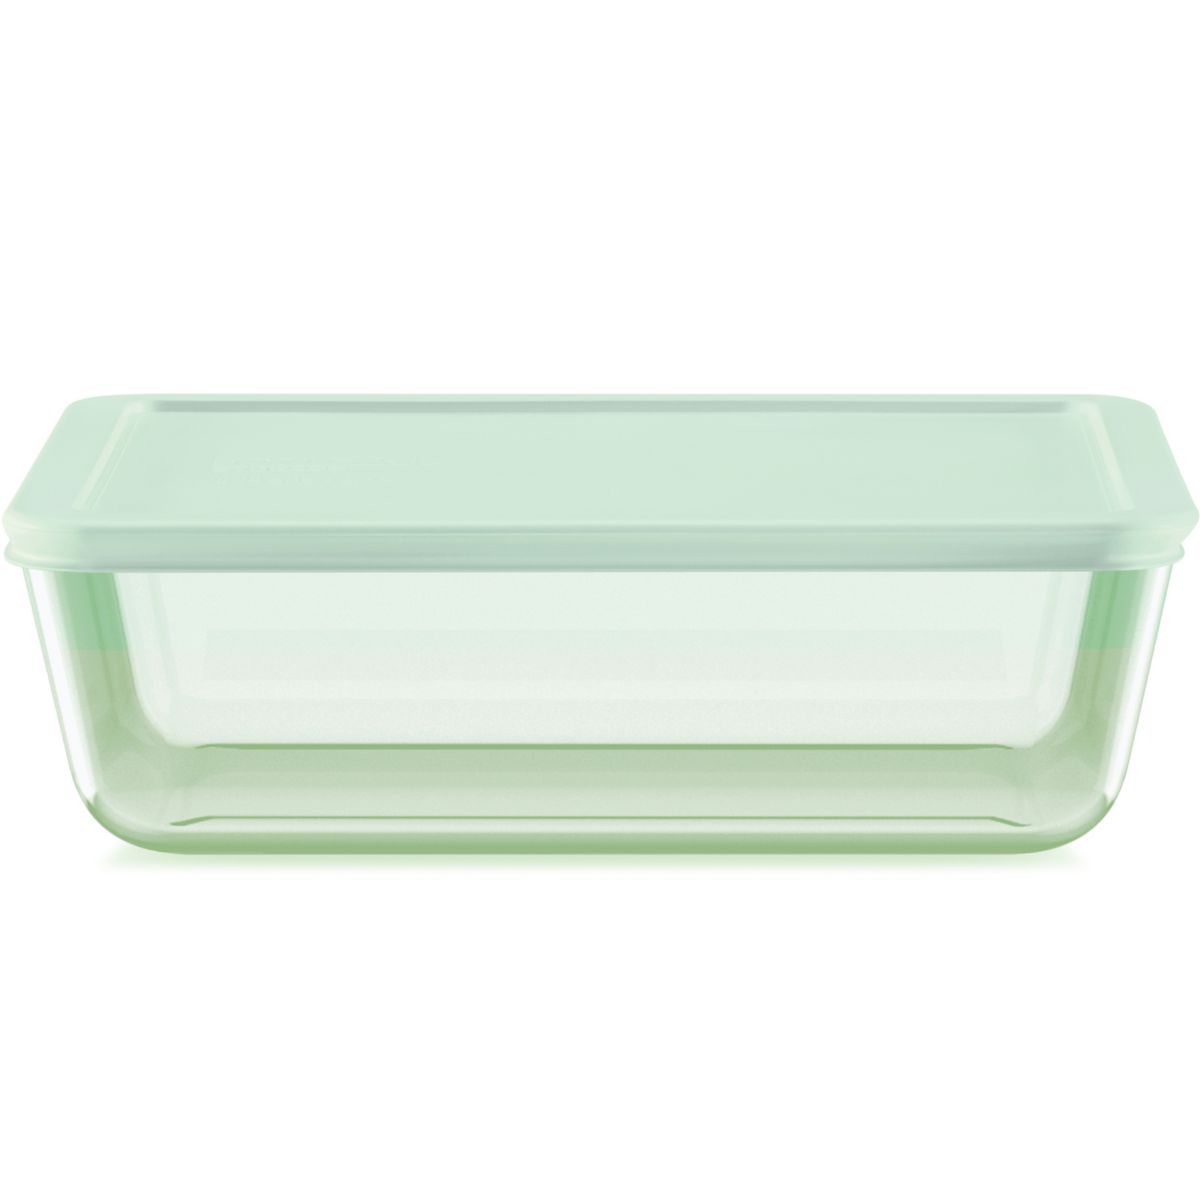 Pyrex Simply Store Green Tinted 11-cup Rectangle Storage with Plastic Lid Pyrex